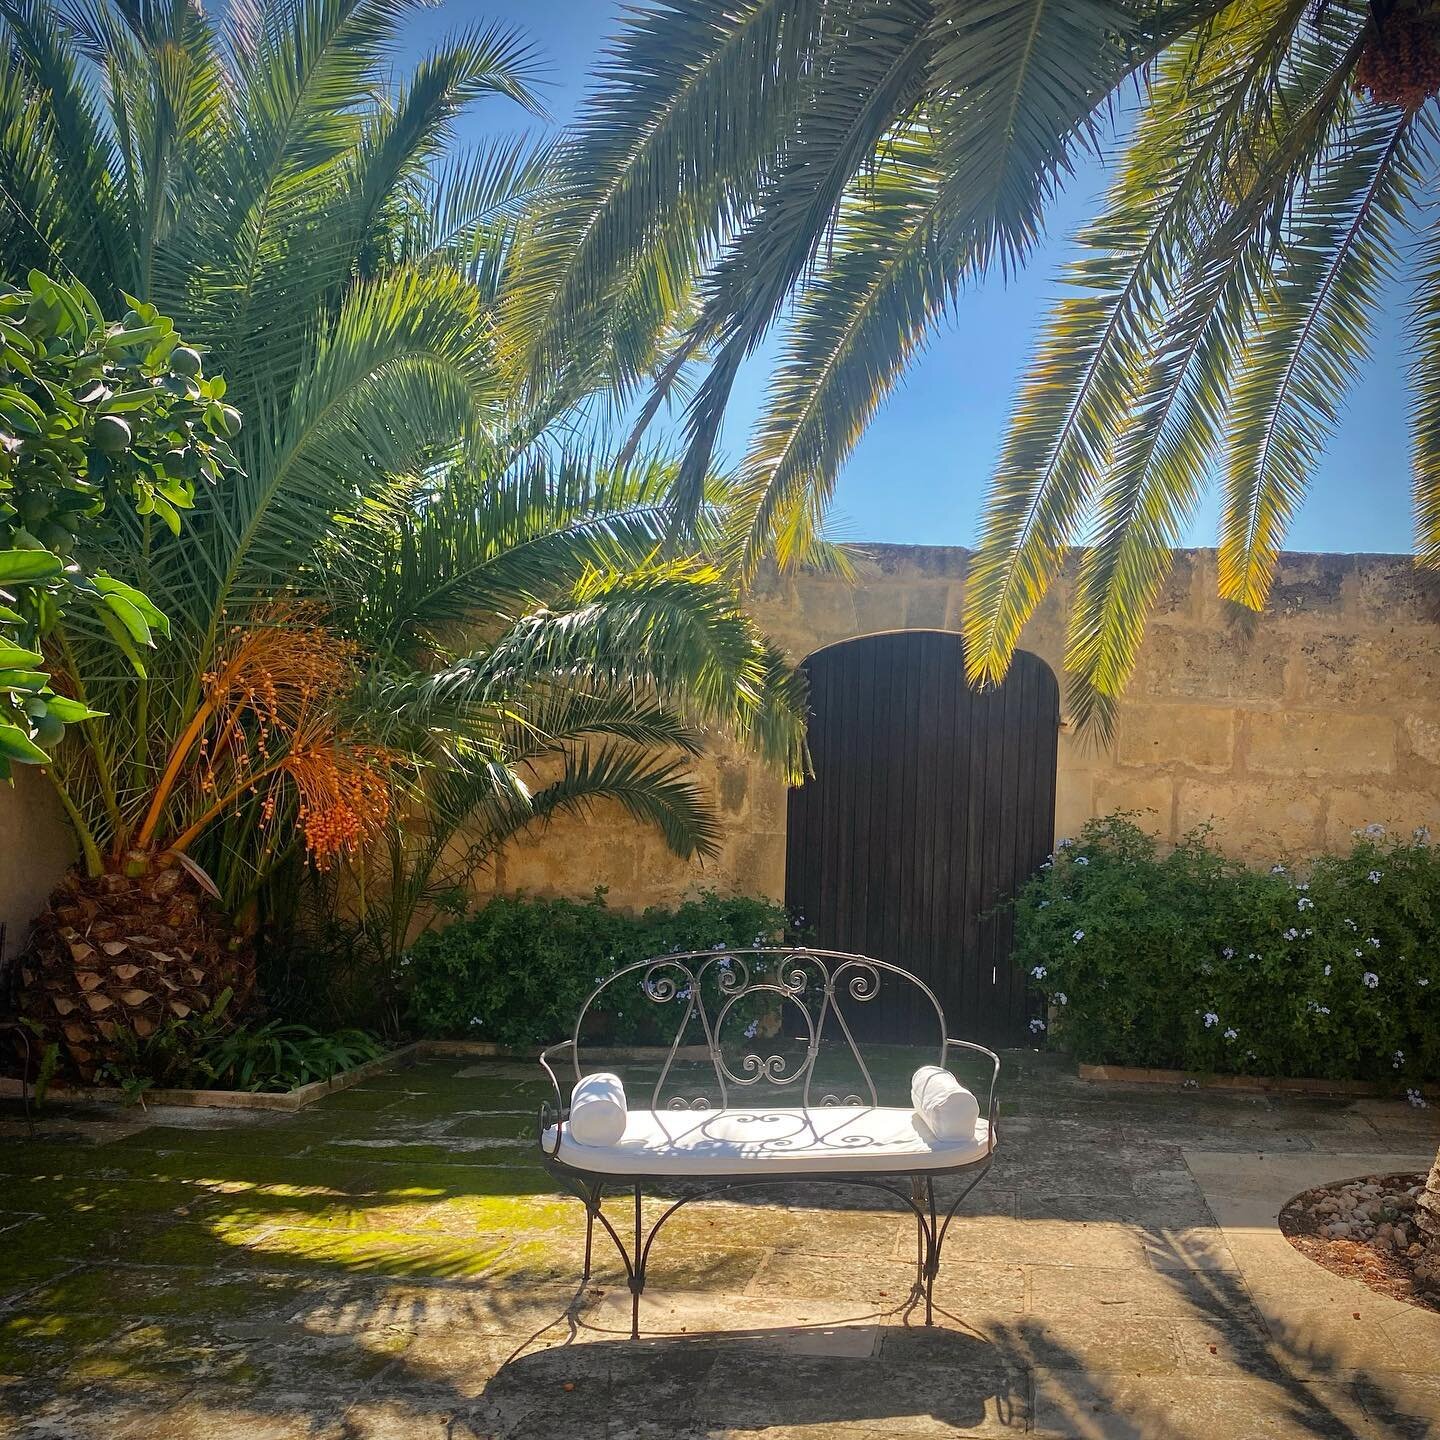 The prettiest of light at this time of year&hellip;.. 
.
#locationmallorca #walledgarden #mediterraneancourtyard #corral #finca #mediterraneanstyle #photolocation #fotolocation #filmlocation #letsshootoutside